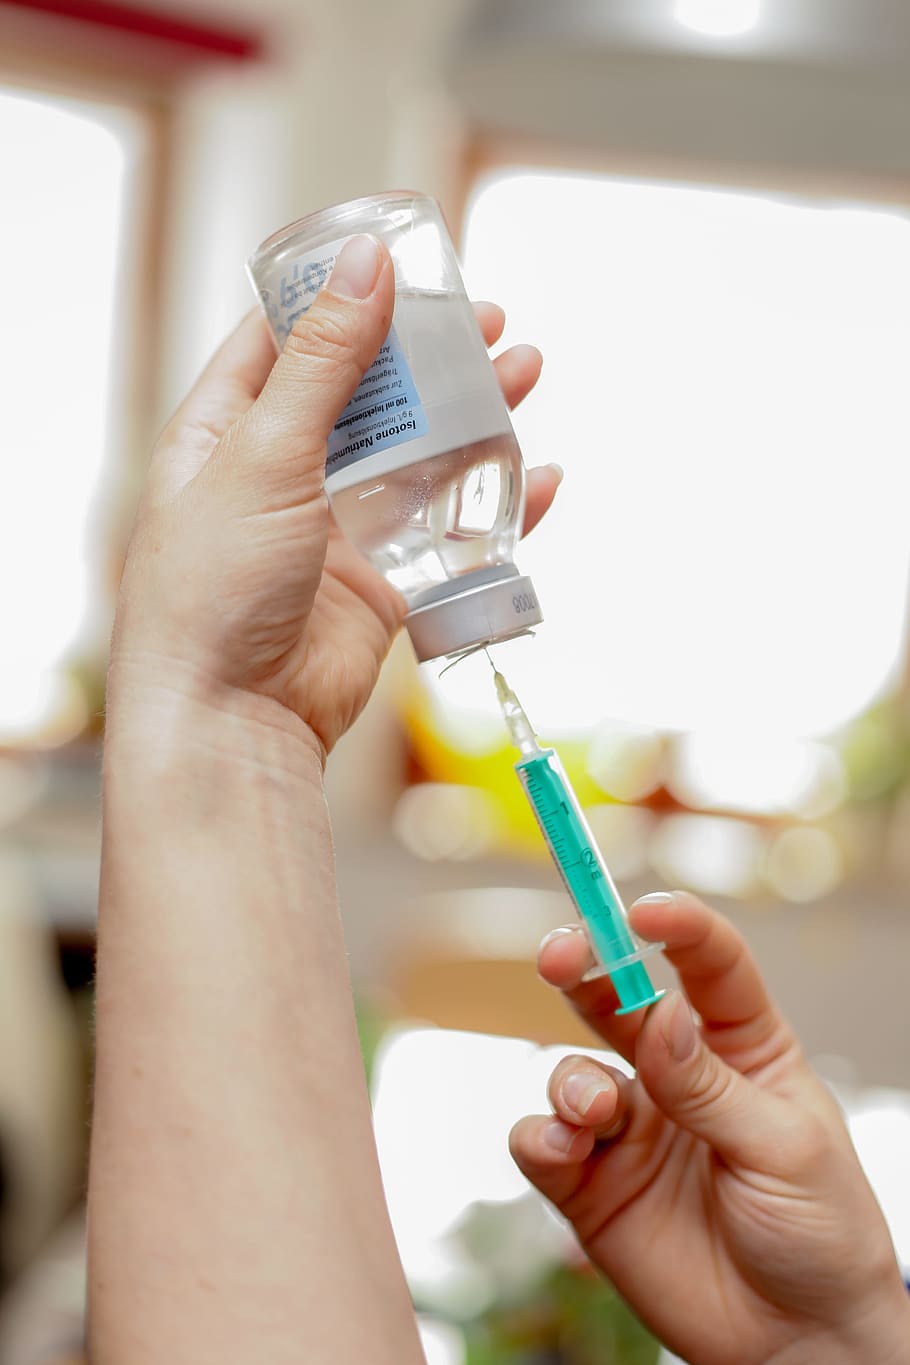 person, getting, clear, liquid, bottle, using, syringe, vaccination, healthcare, needle